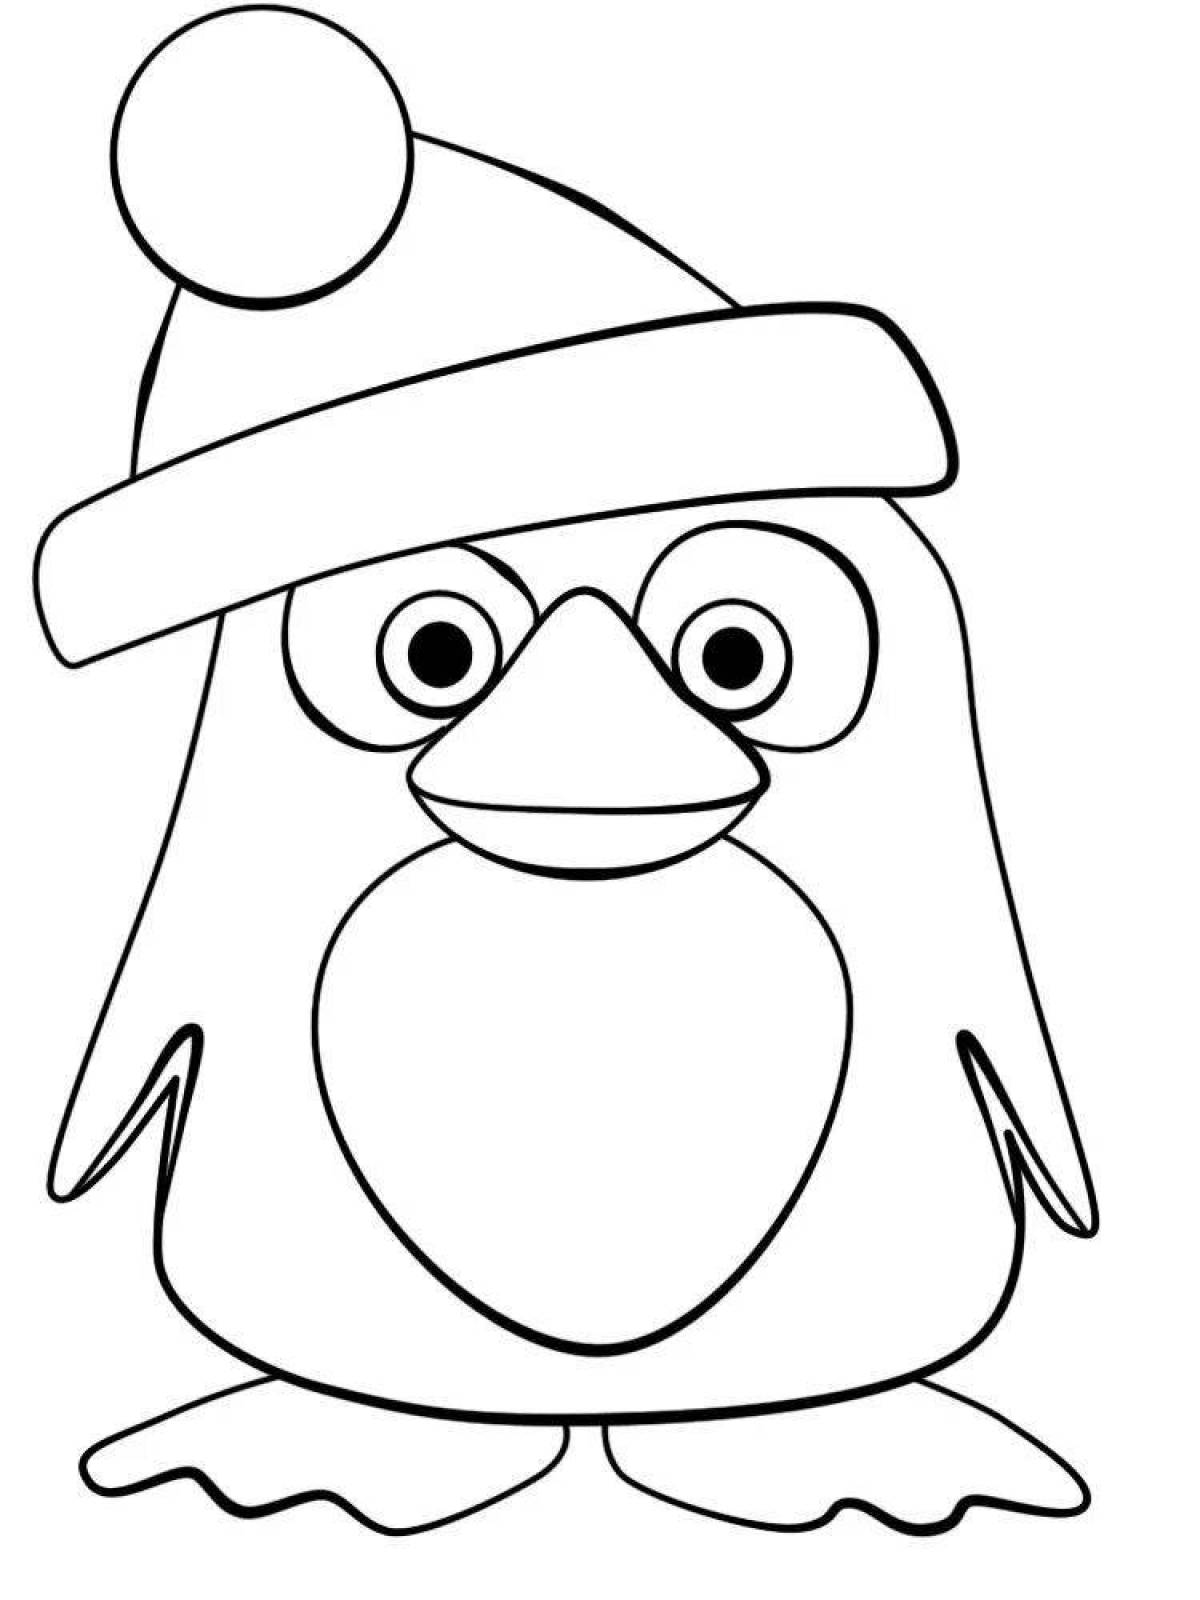 Colorful penguin coloring page